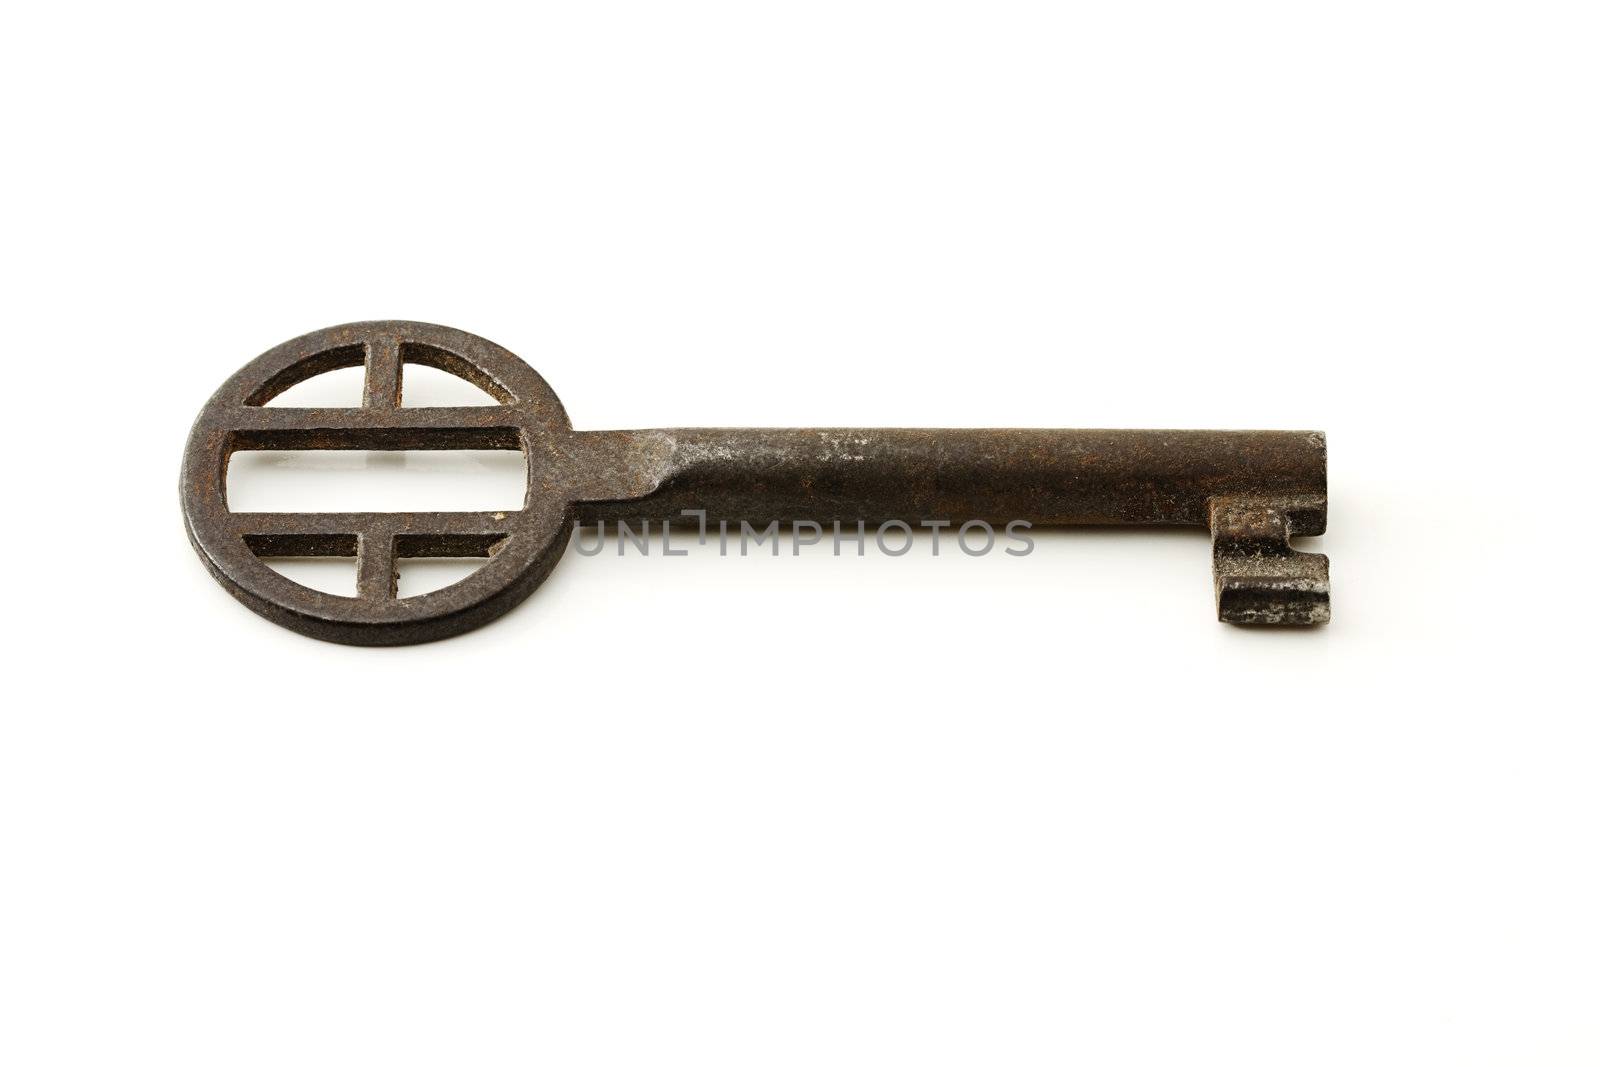 one small rusty key on white background